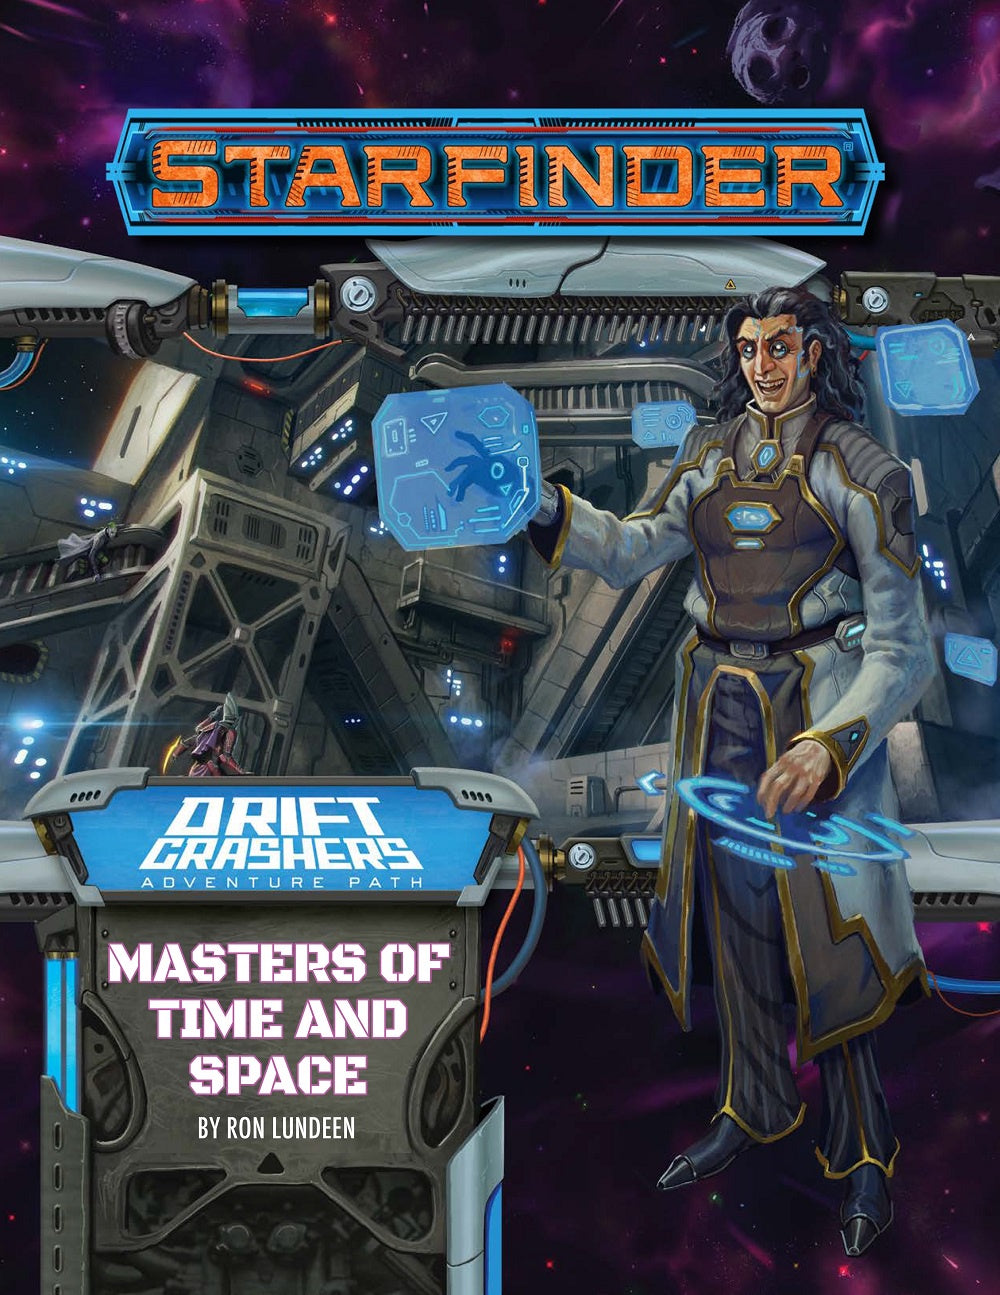 Starfinder RPG Adventure Path Drift Crashers #3 Masters of Time and Space